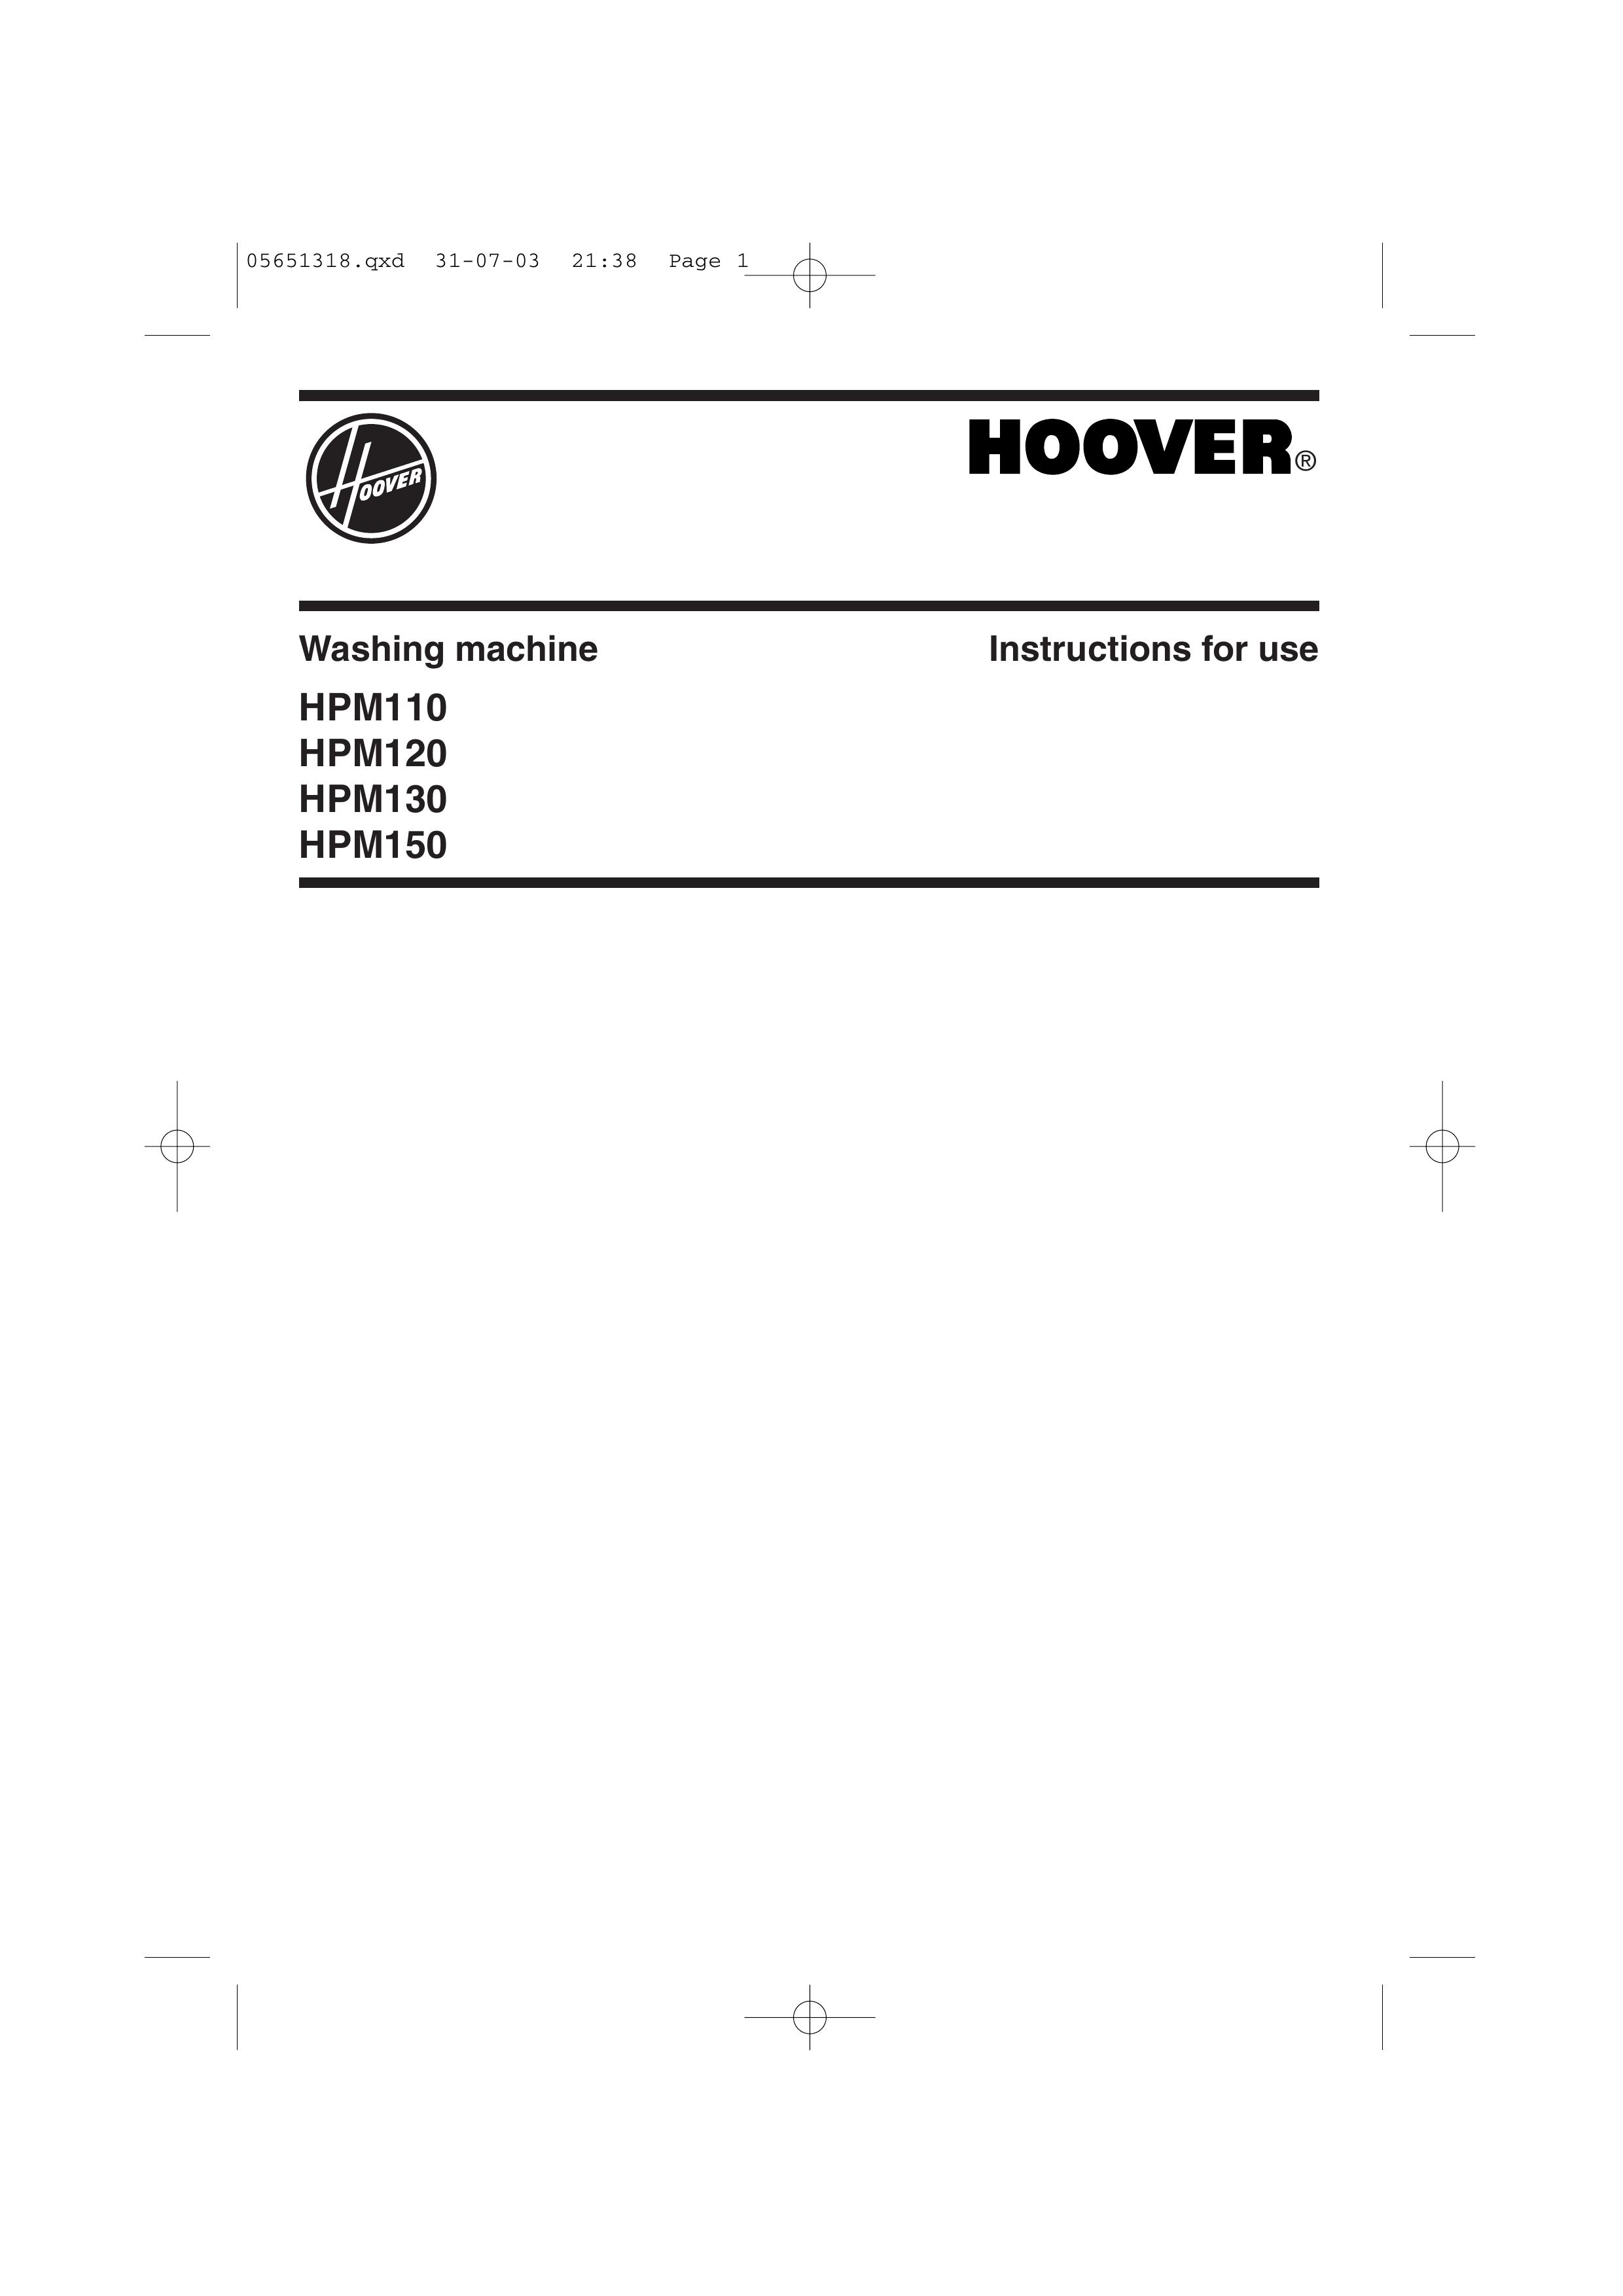 Hoover HPM110 Washer User Manual